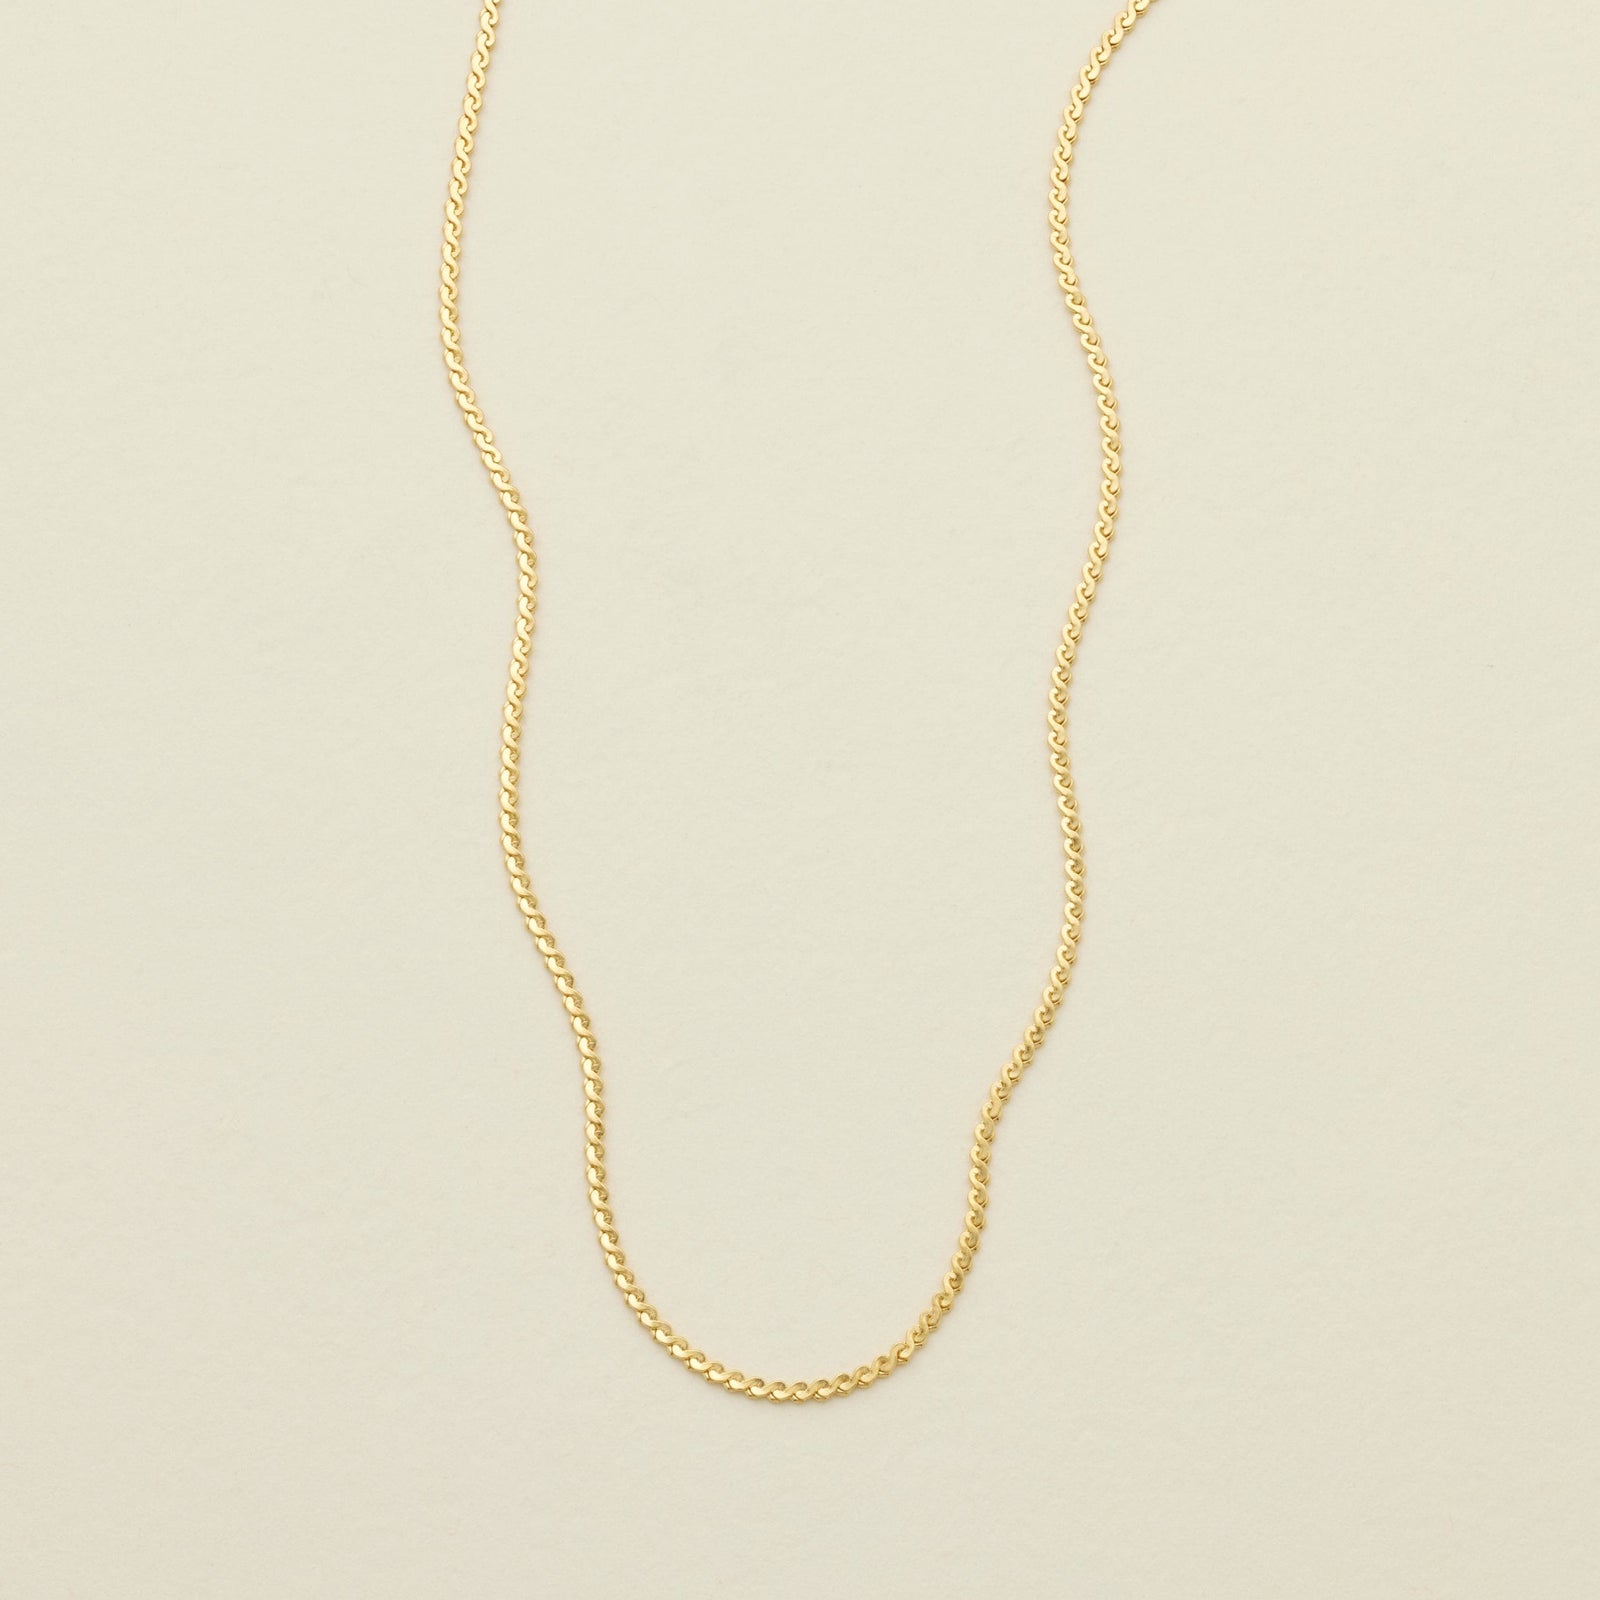 Serpentine Chain Necklace Gold Filled Necklace